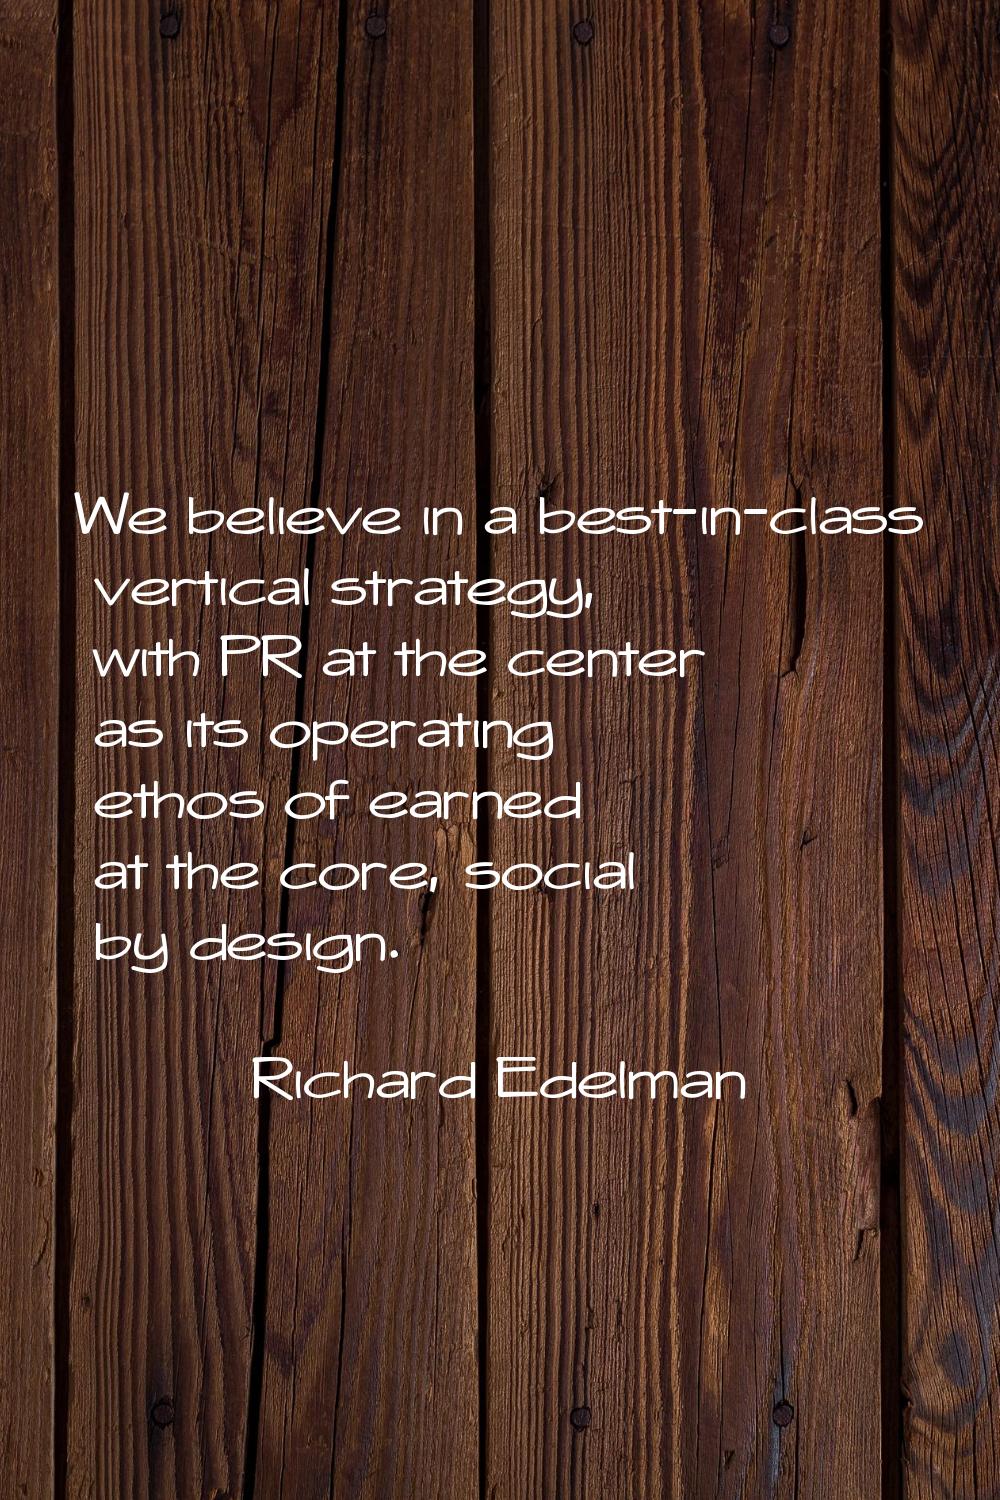 We believe in a best-in-class vertical strategy, with PR at the center as its operating ethos of ea